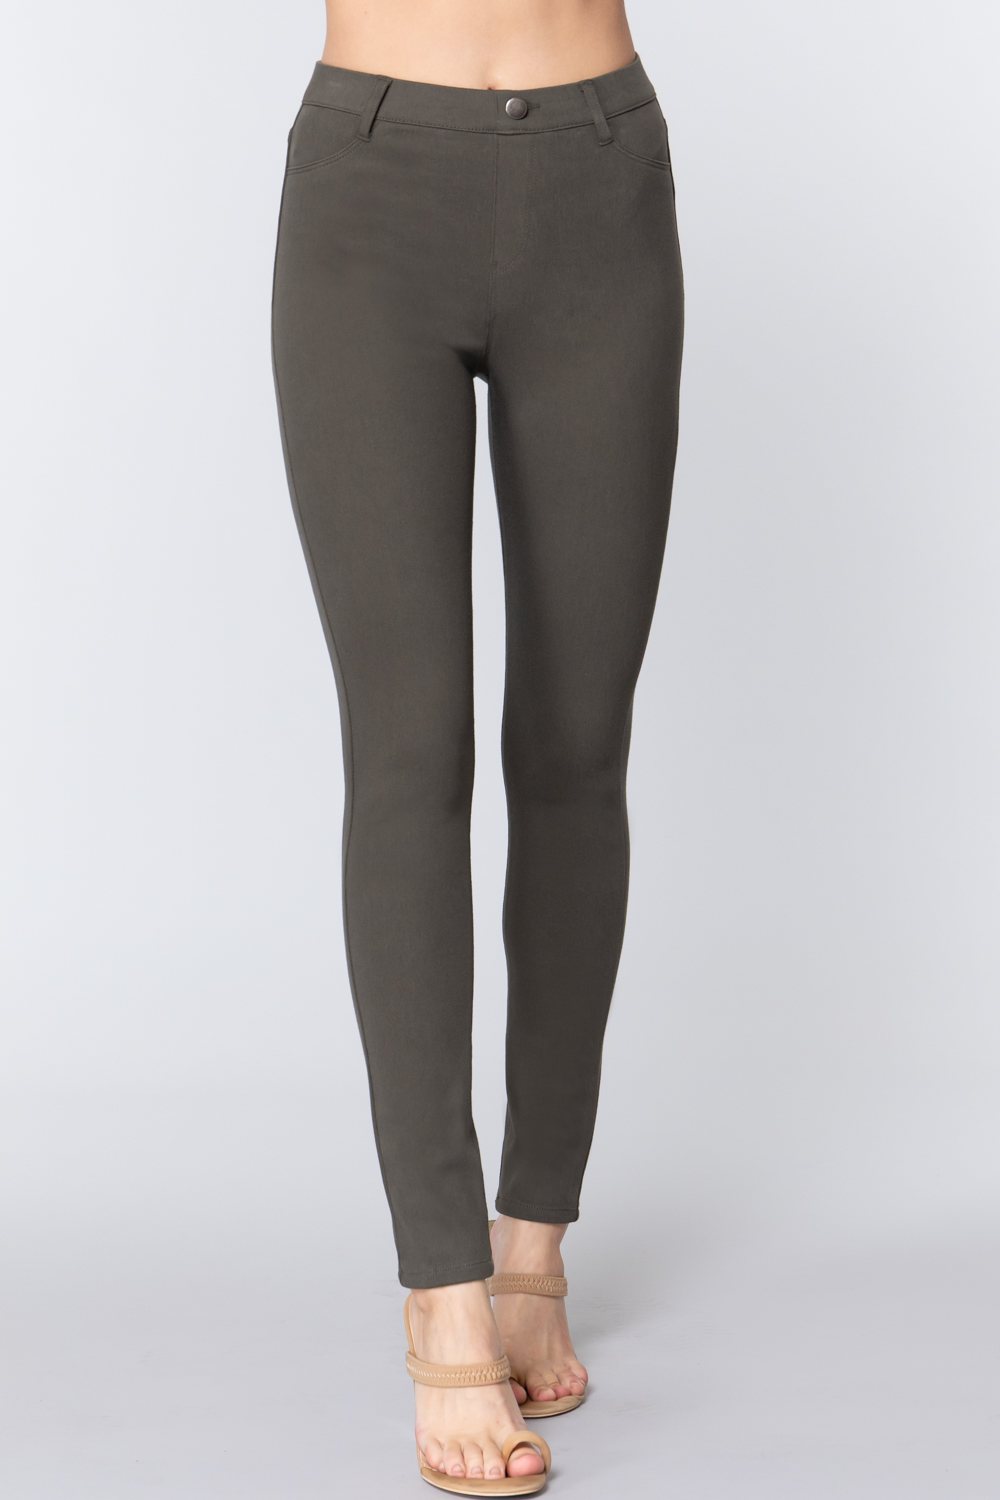 THE JODIE Knit Twill Jeggings